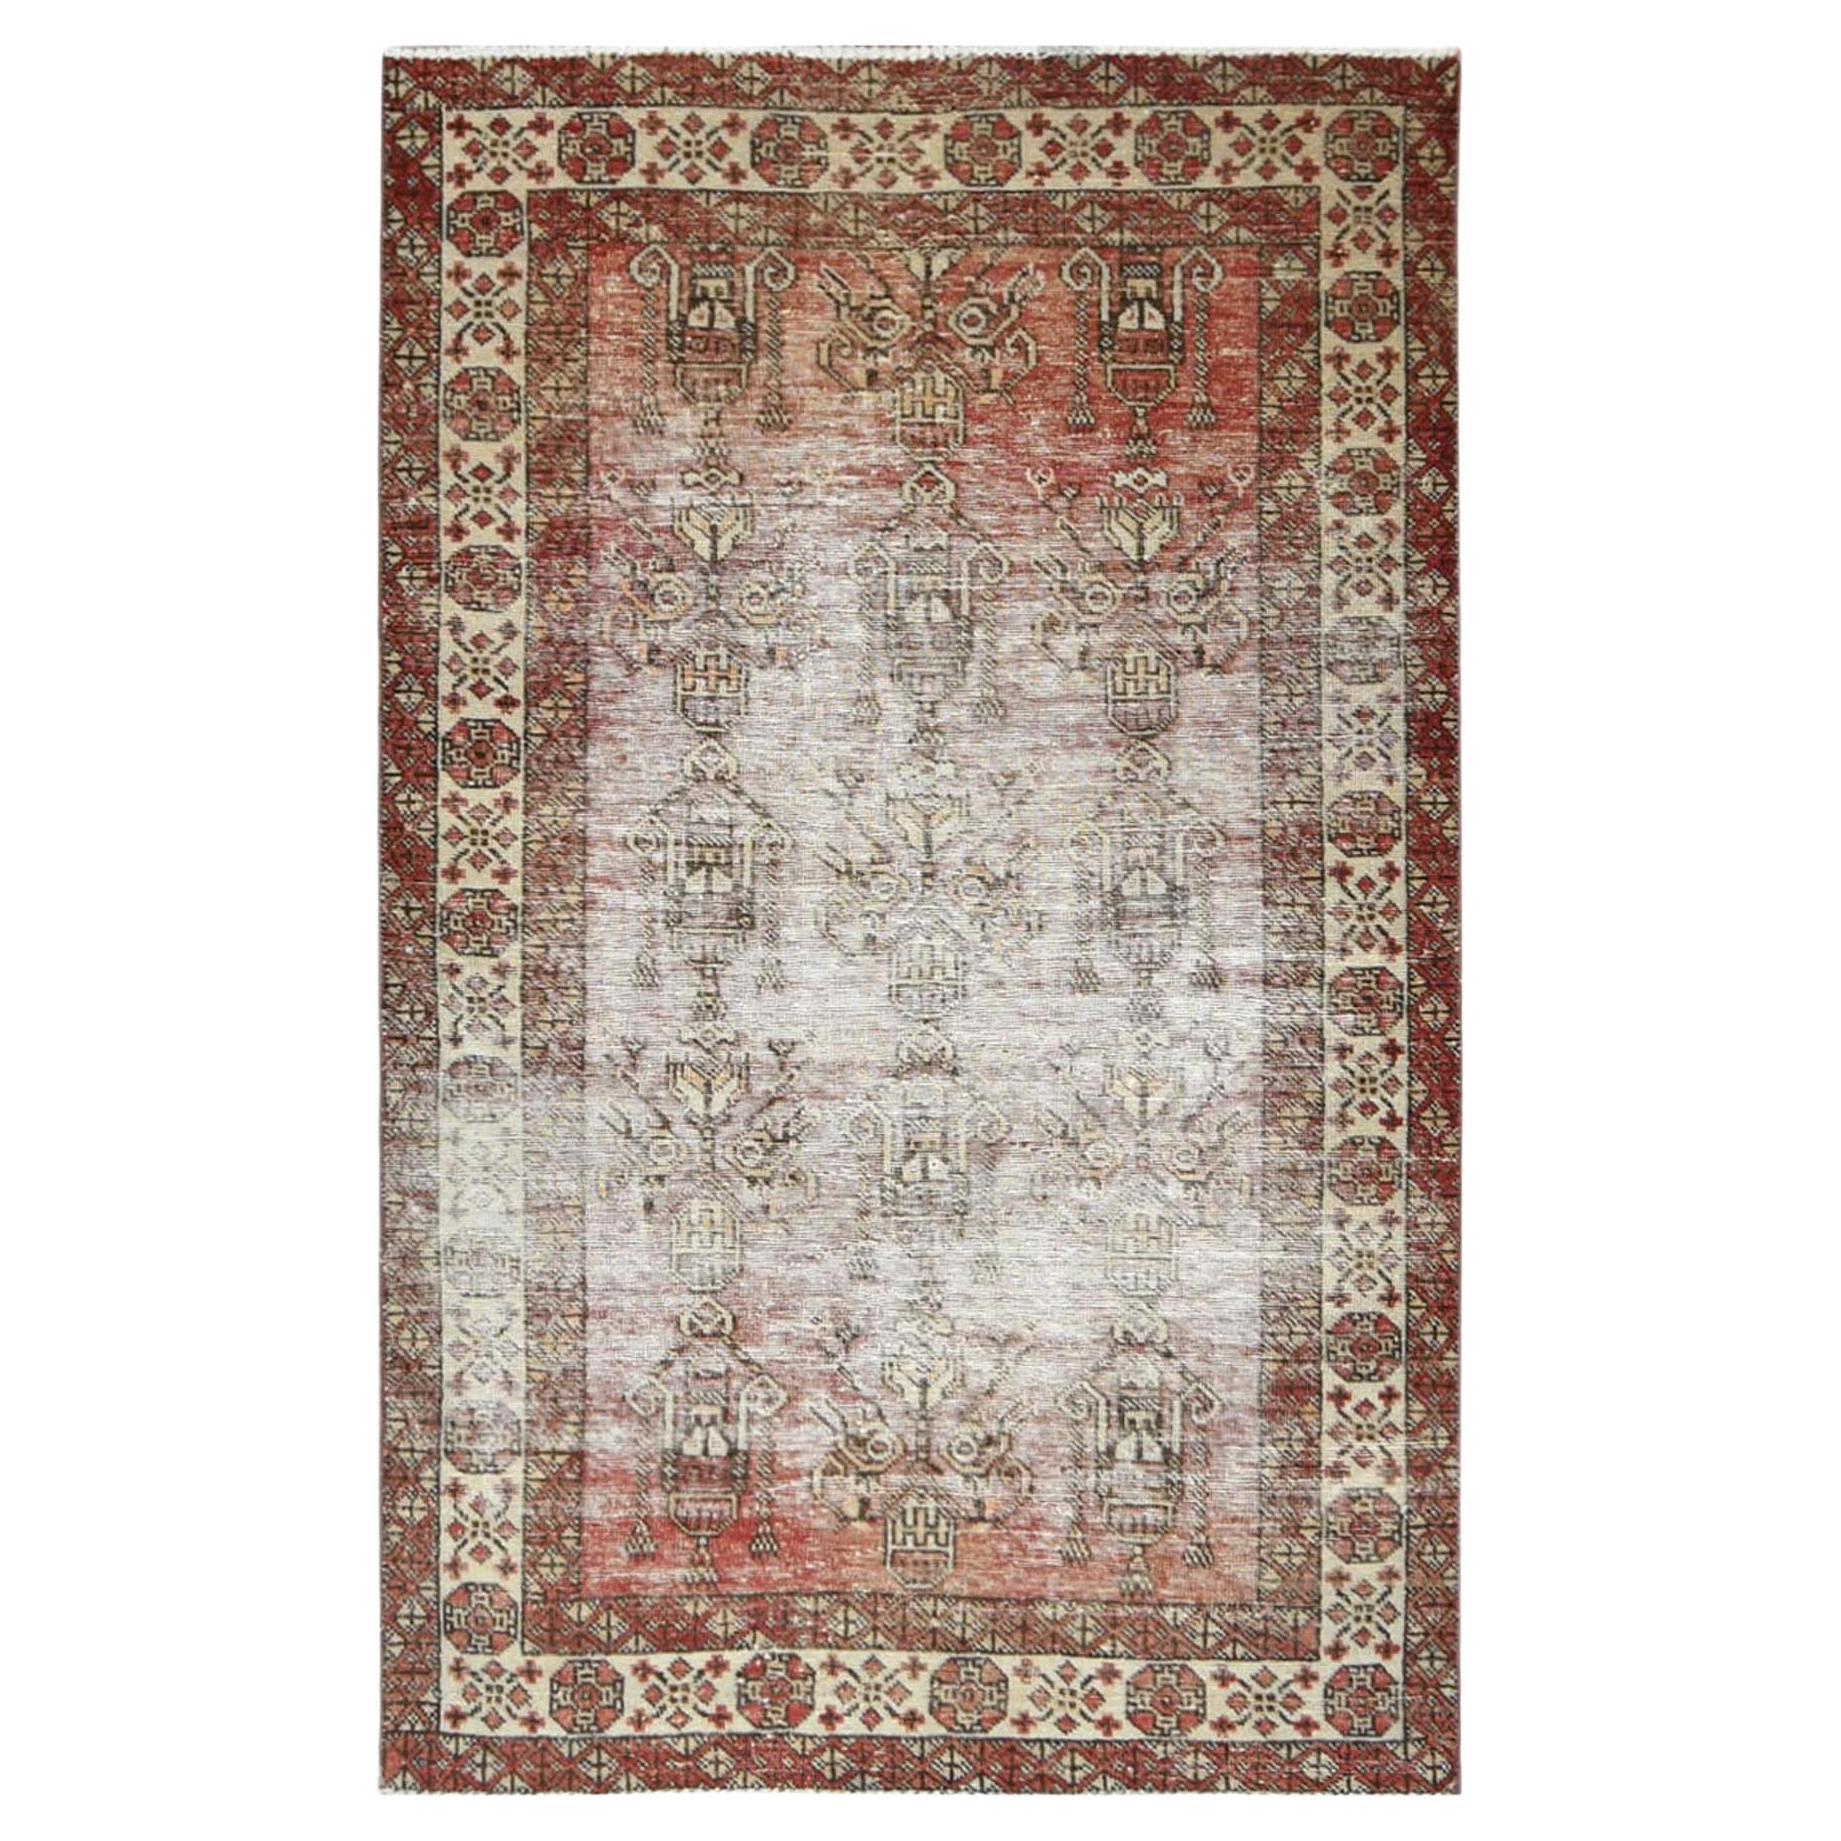 Terracotta Colors, Distressed Worn Wool Hand Knotted, Vintage Persian Shiraz Rug